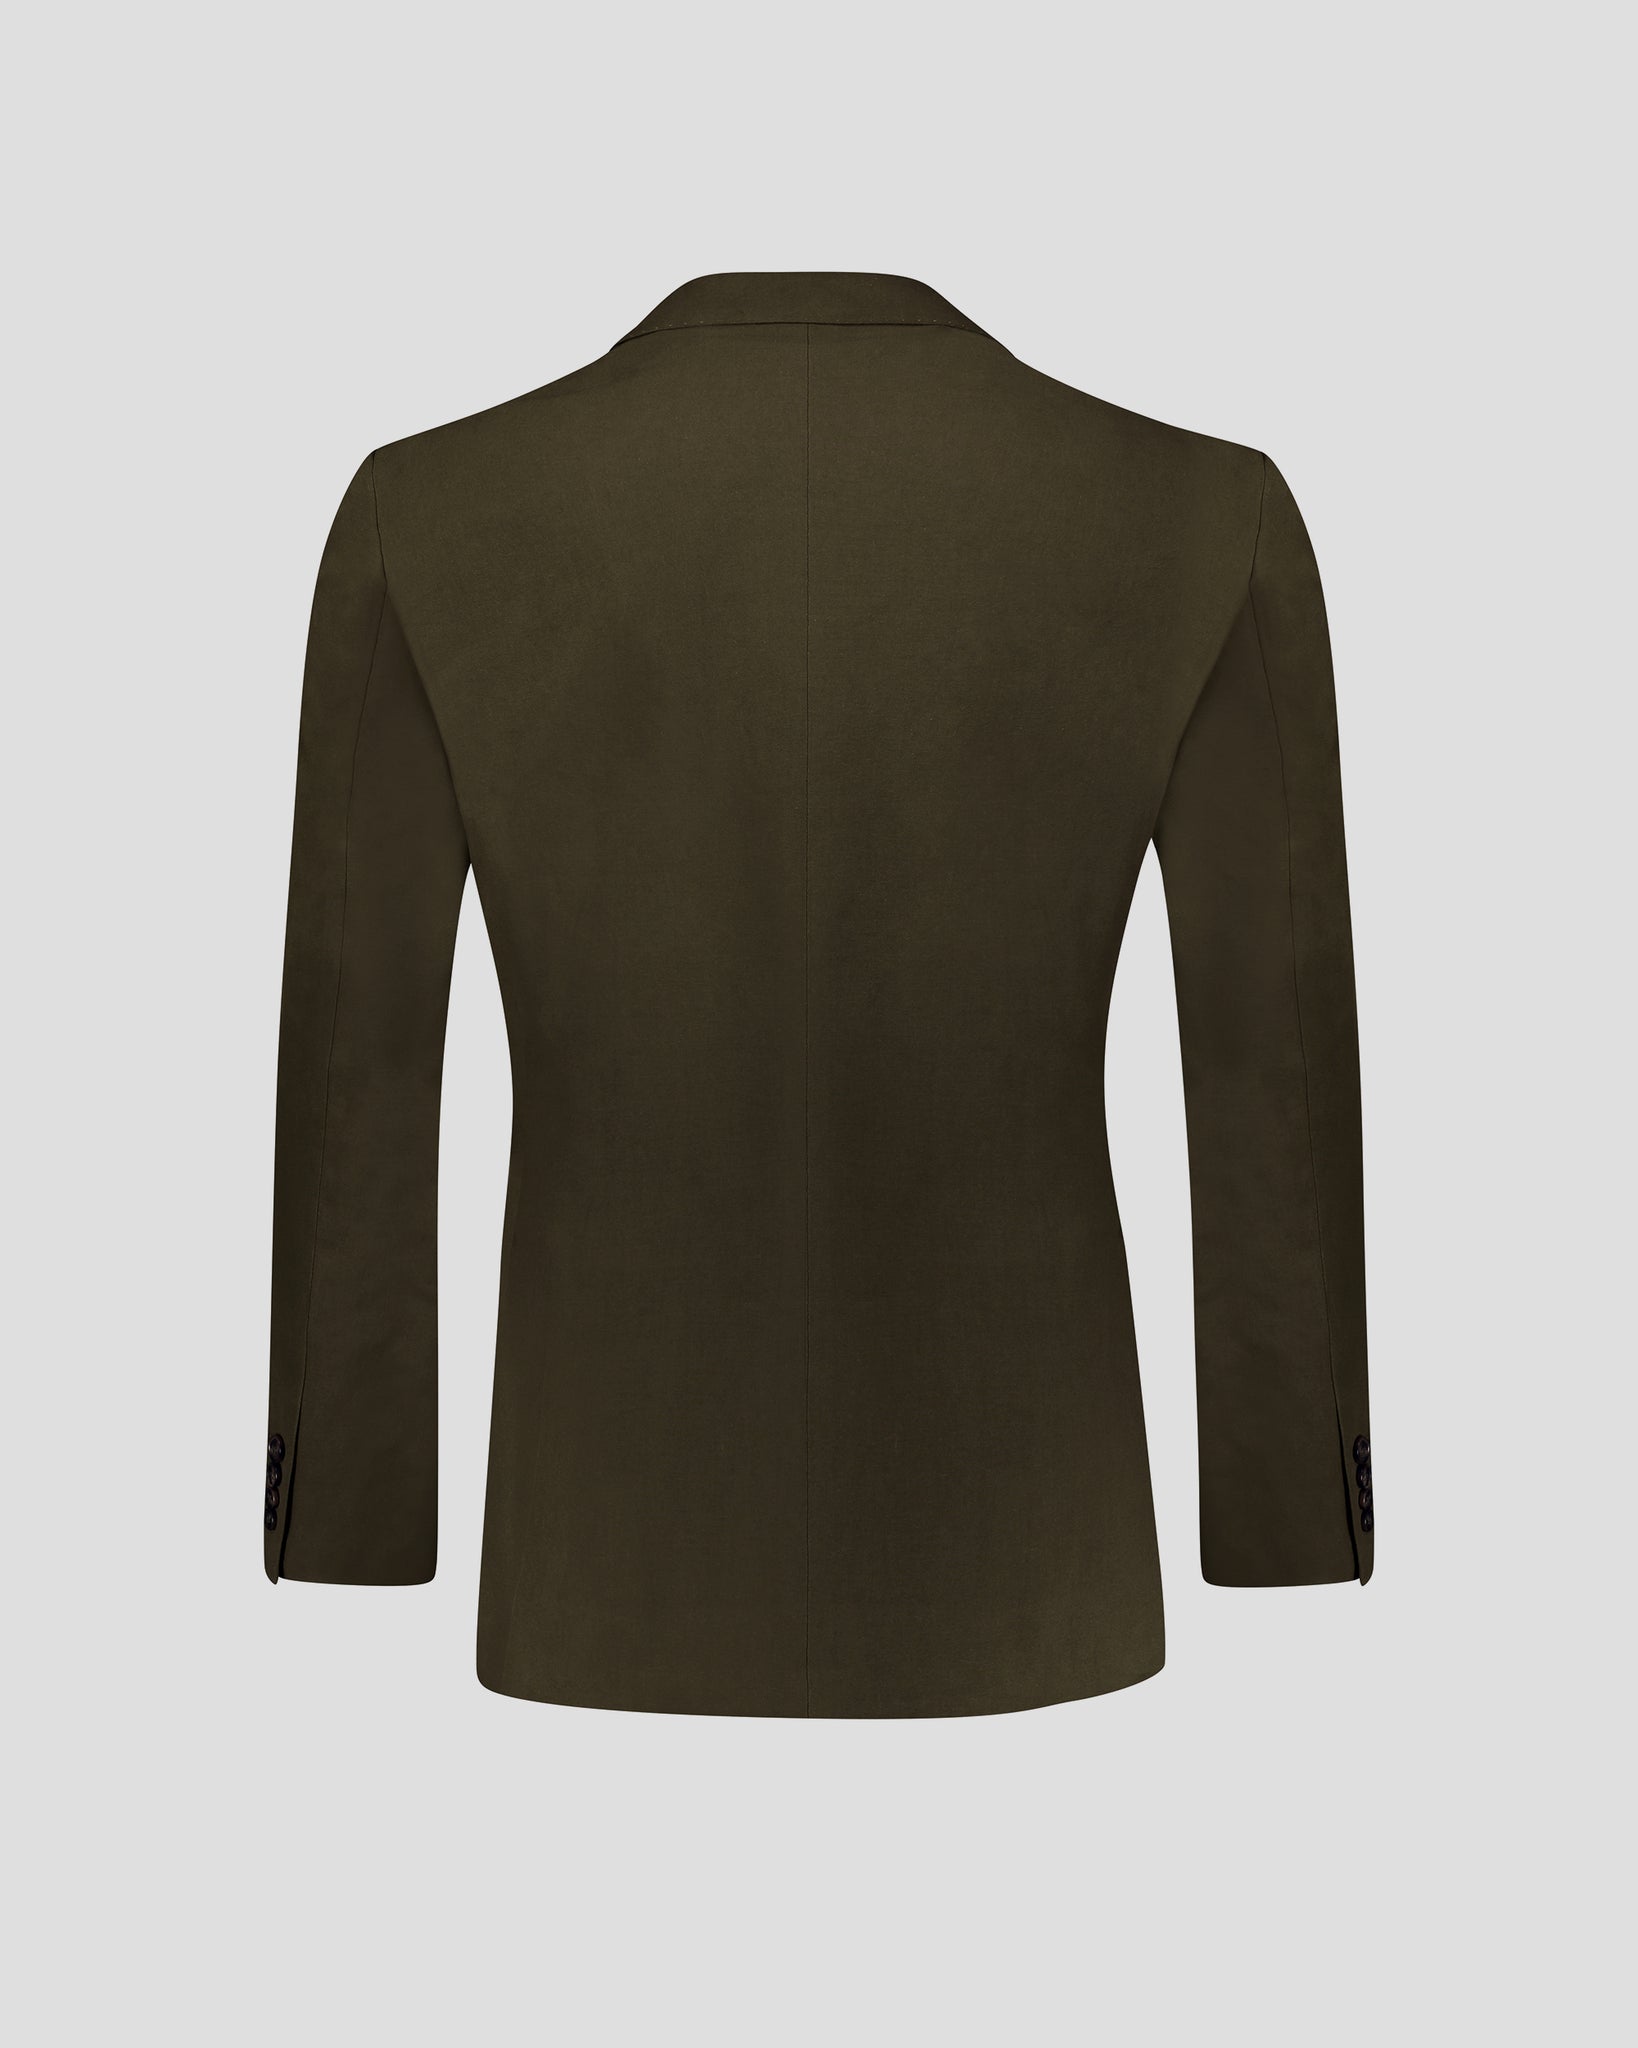 Southern Gents Single Breasted Blazer - Olive